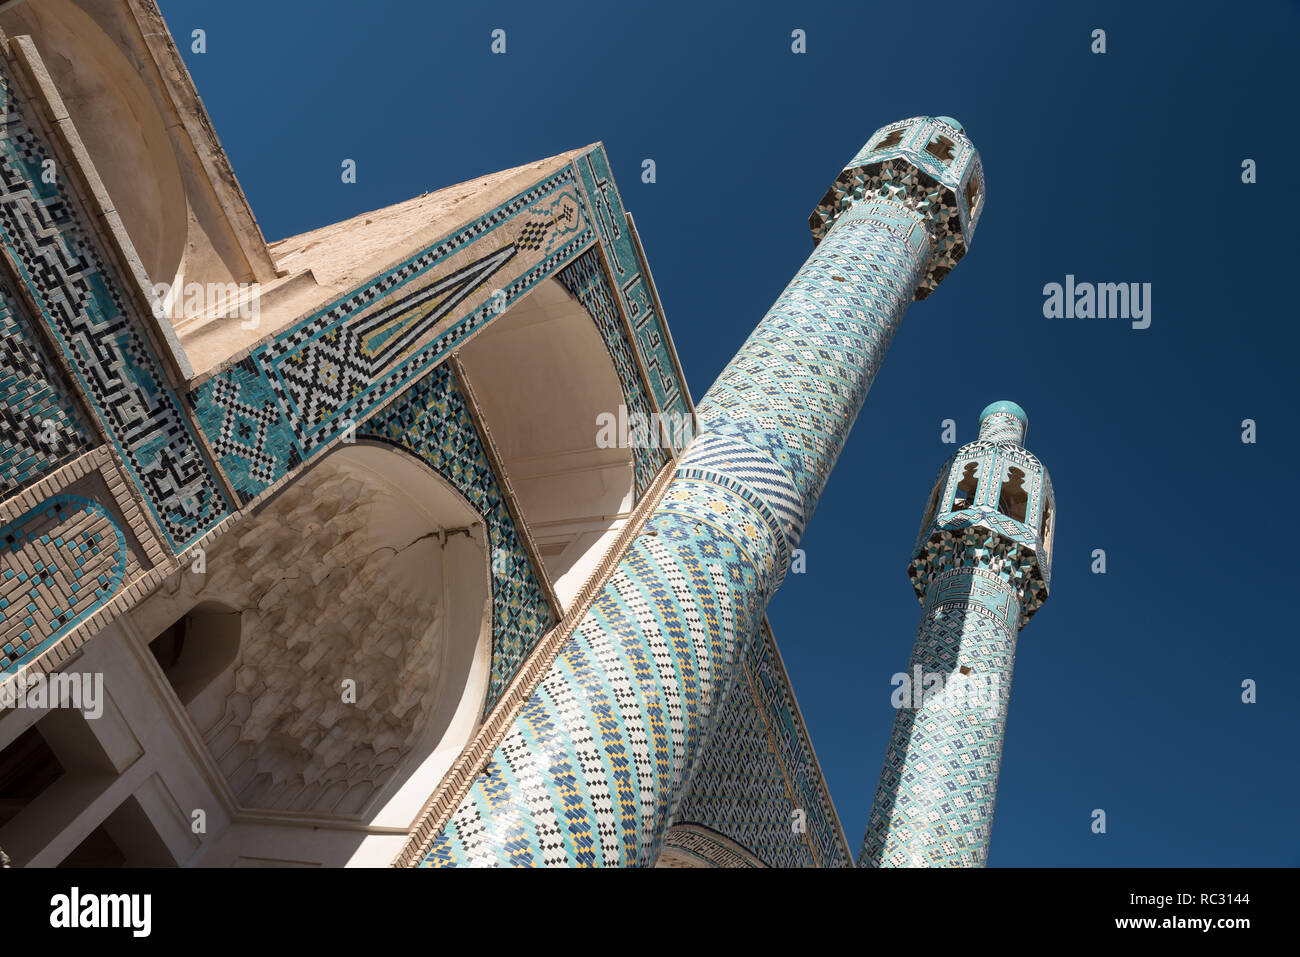 View of twin minarets and portico with decorative tiled mosaics, part of Shah Nematollah Vali Shrine, Iran Stock Photo